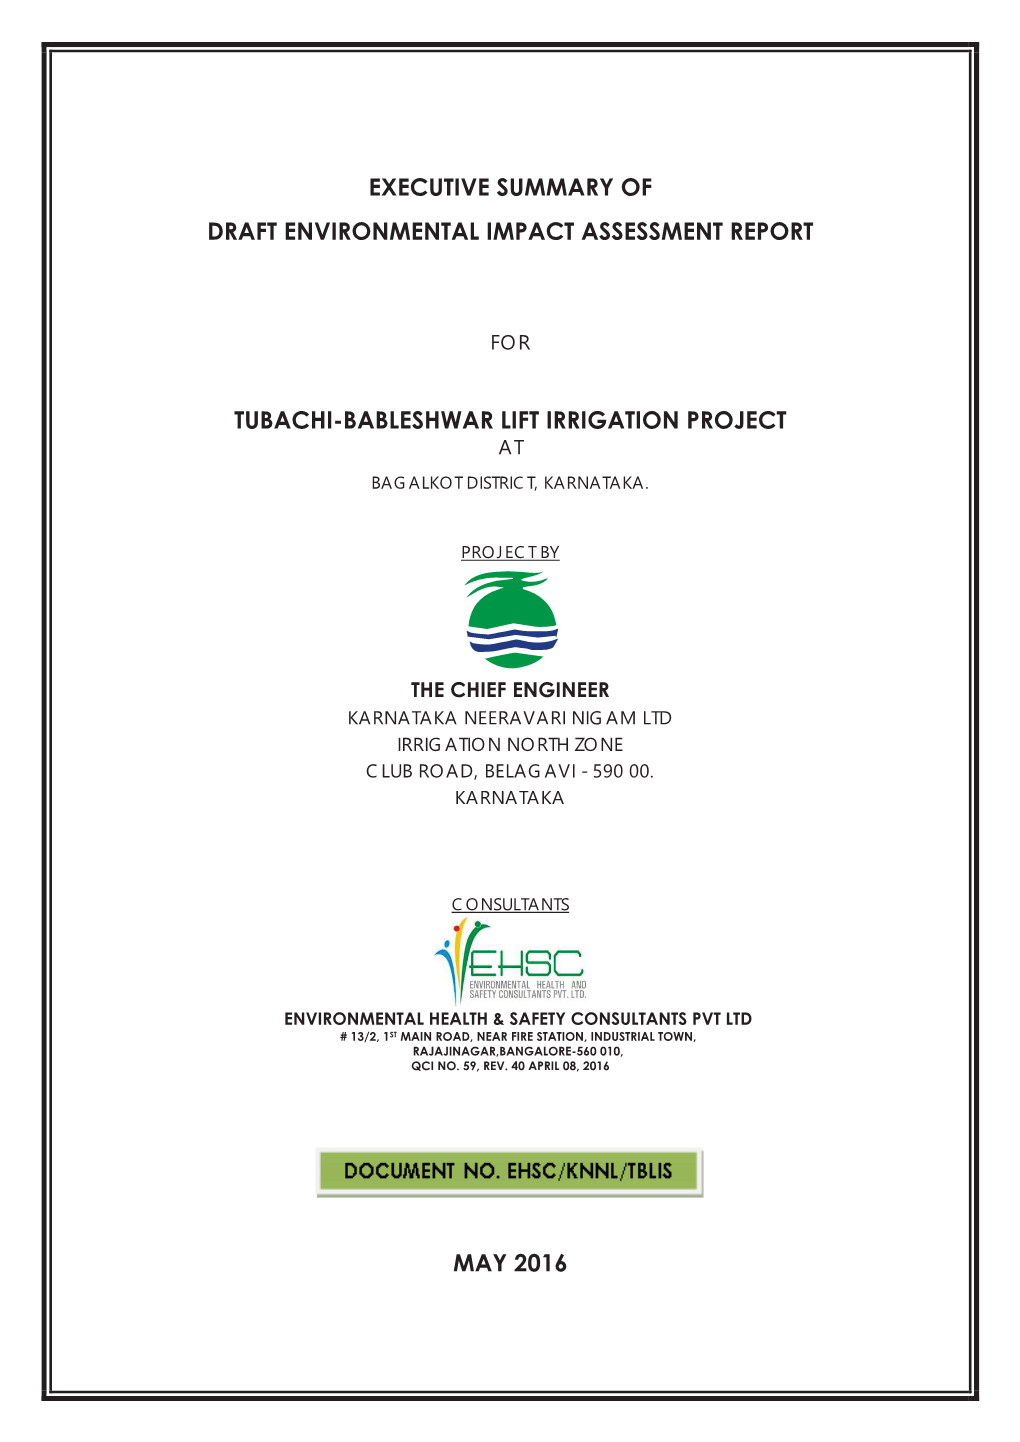 Executive Summary of Draft Environmental Impact Assessment Report Tubachi-Bableshwar Lift Irrigation Project May 2016